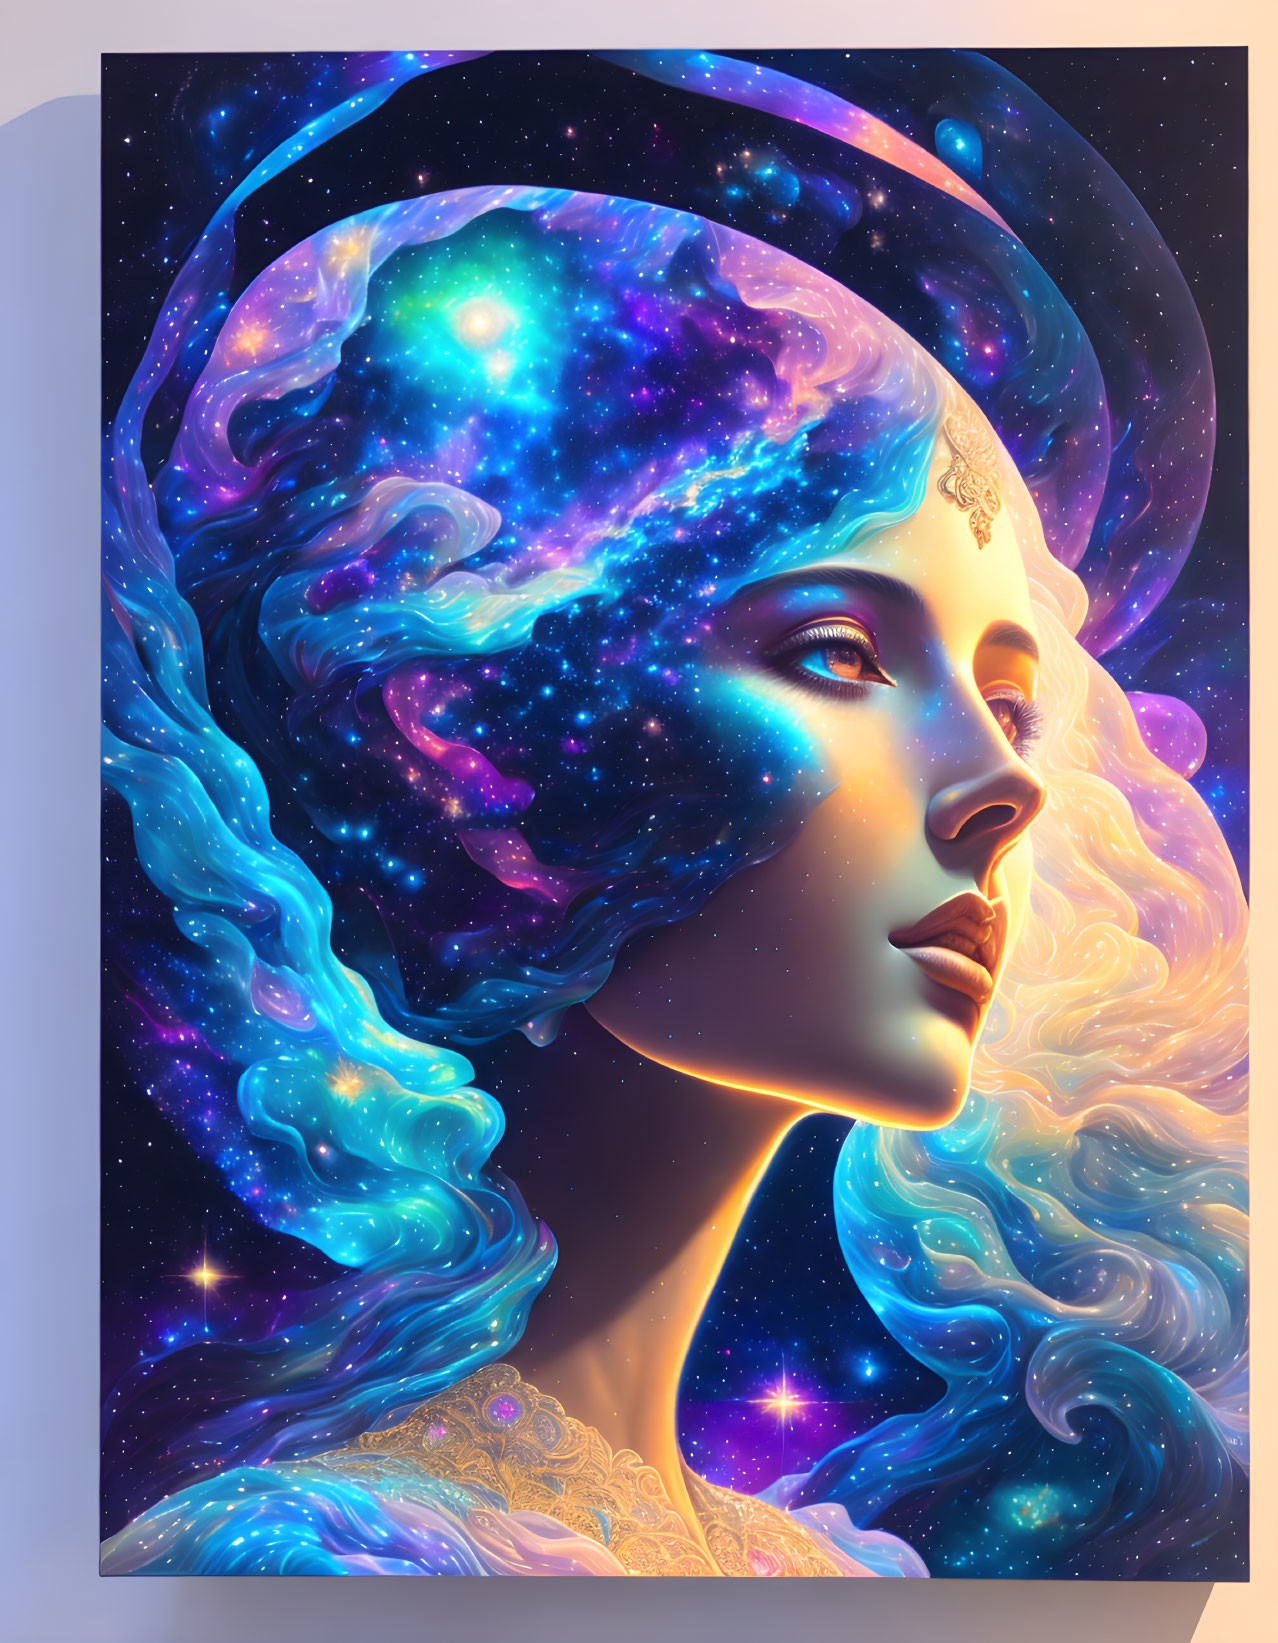 Illustration of woman's profile blending into cosmic galaxy landscape